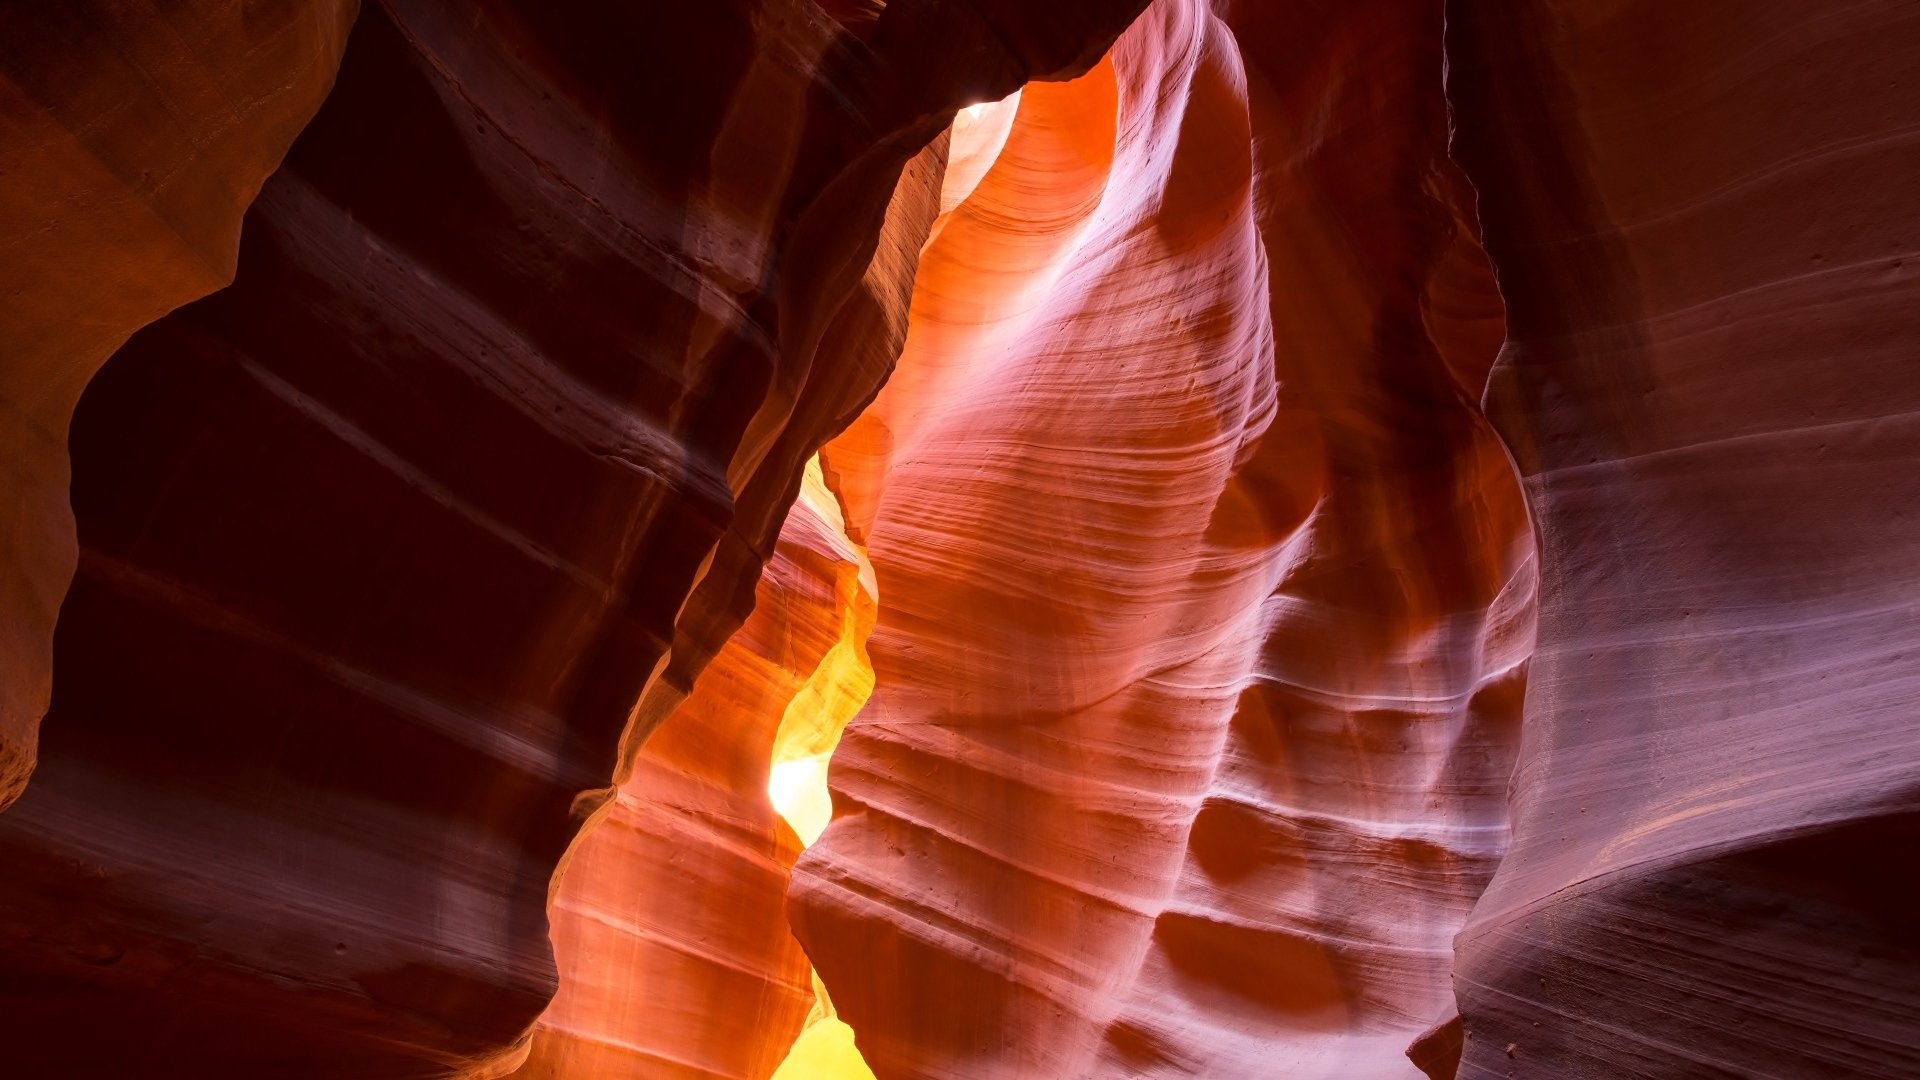 4K Ultra HD Antelope Canyon wallpapers, Stunning backgrounds, Nature's masterpiece, Wallpaper collection, 1920x1080 Full HD Desktop